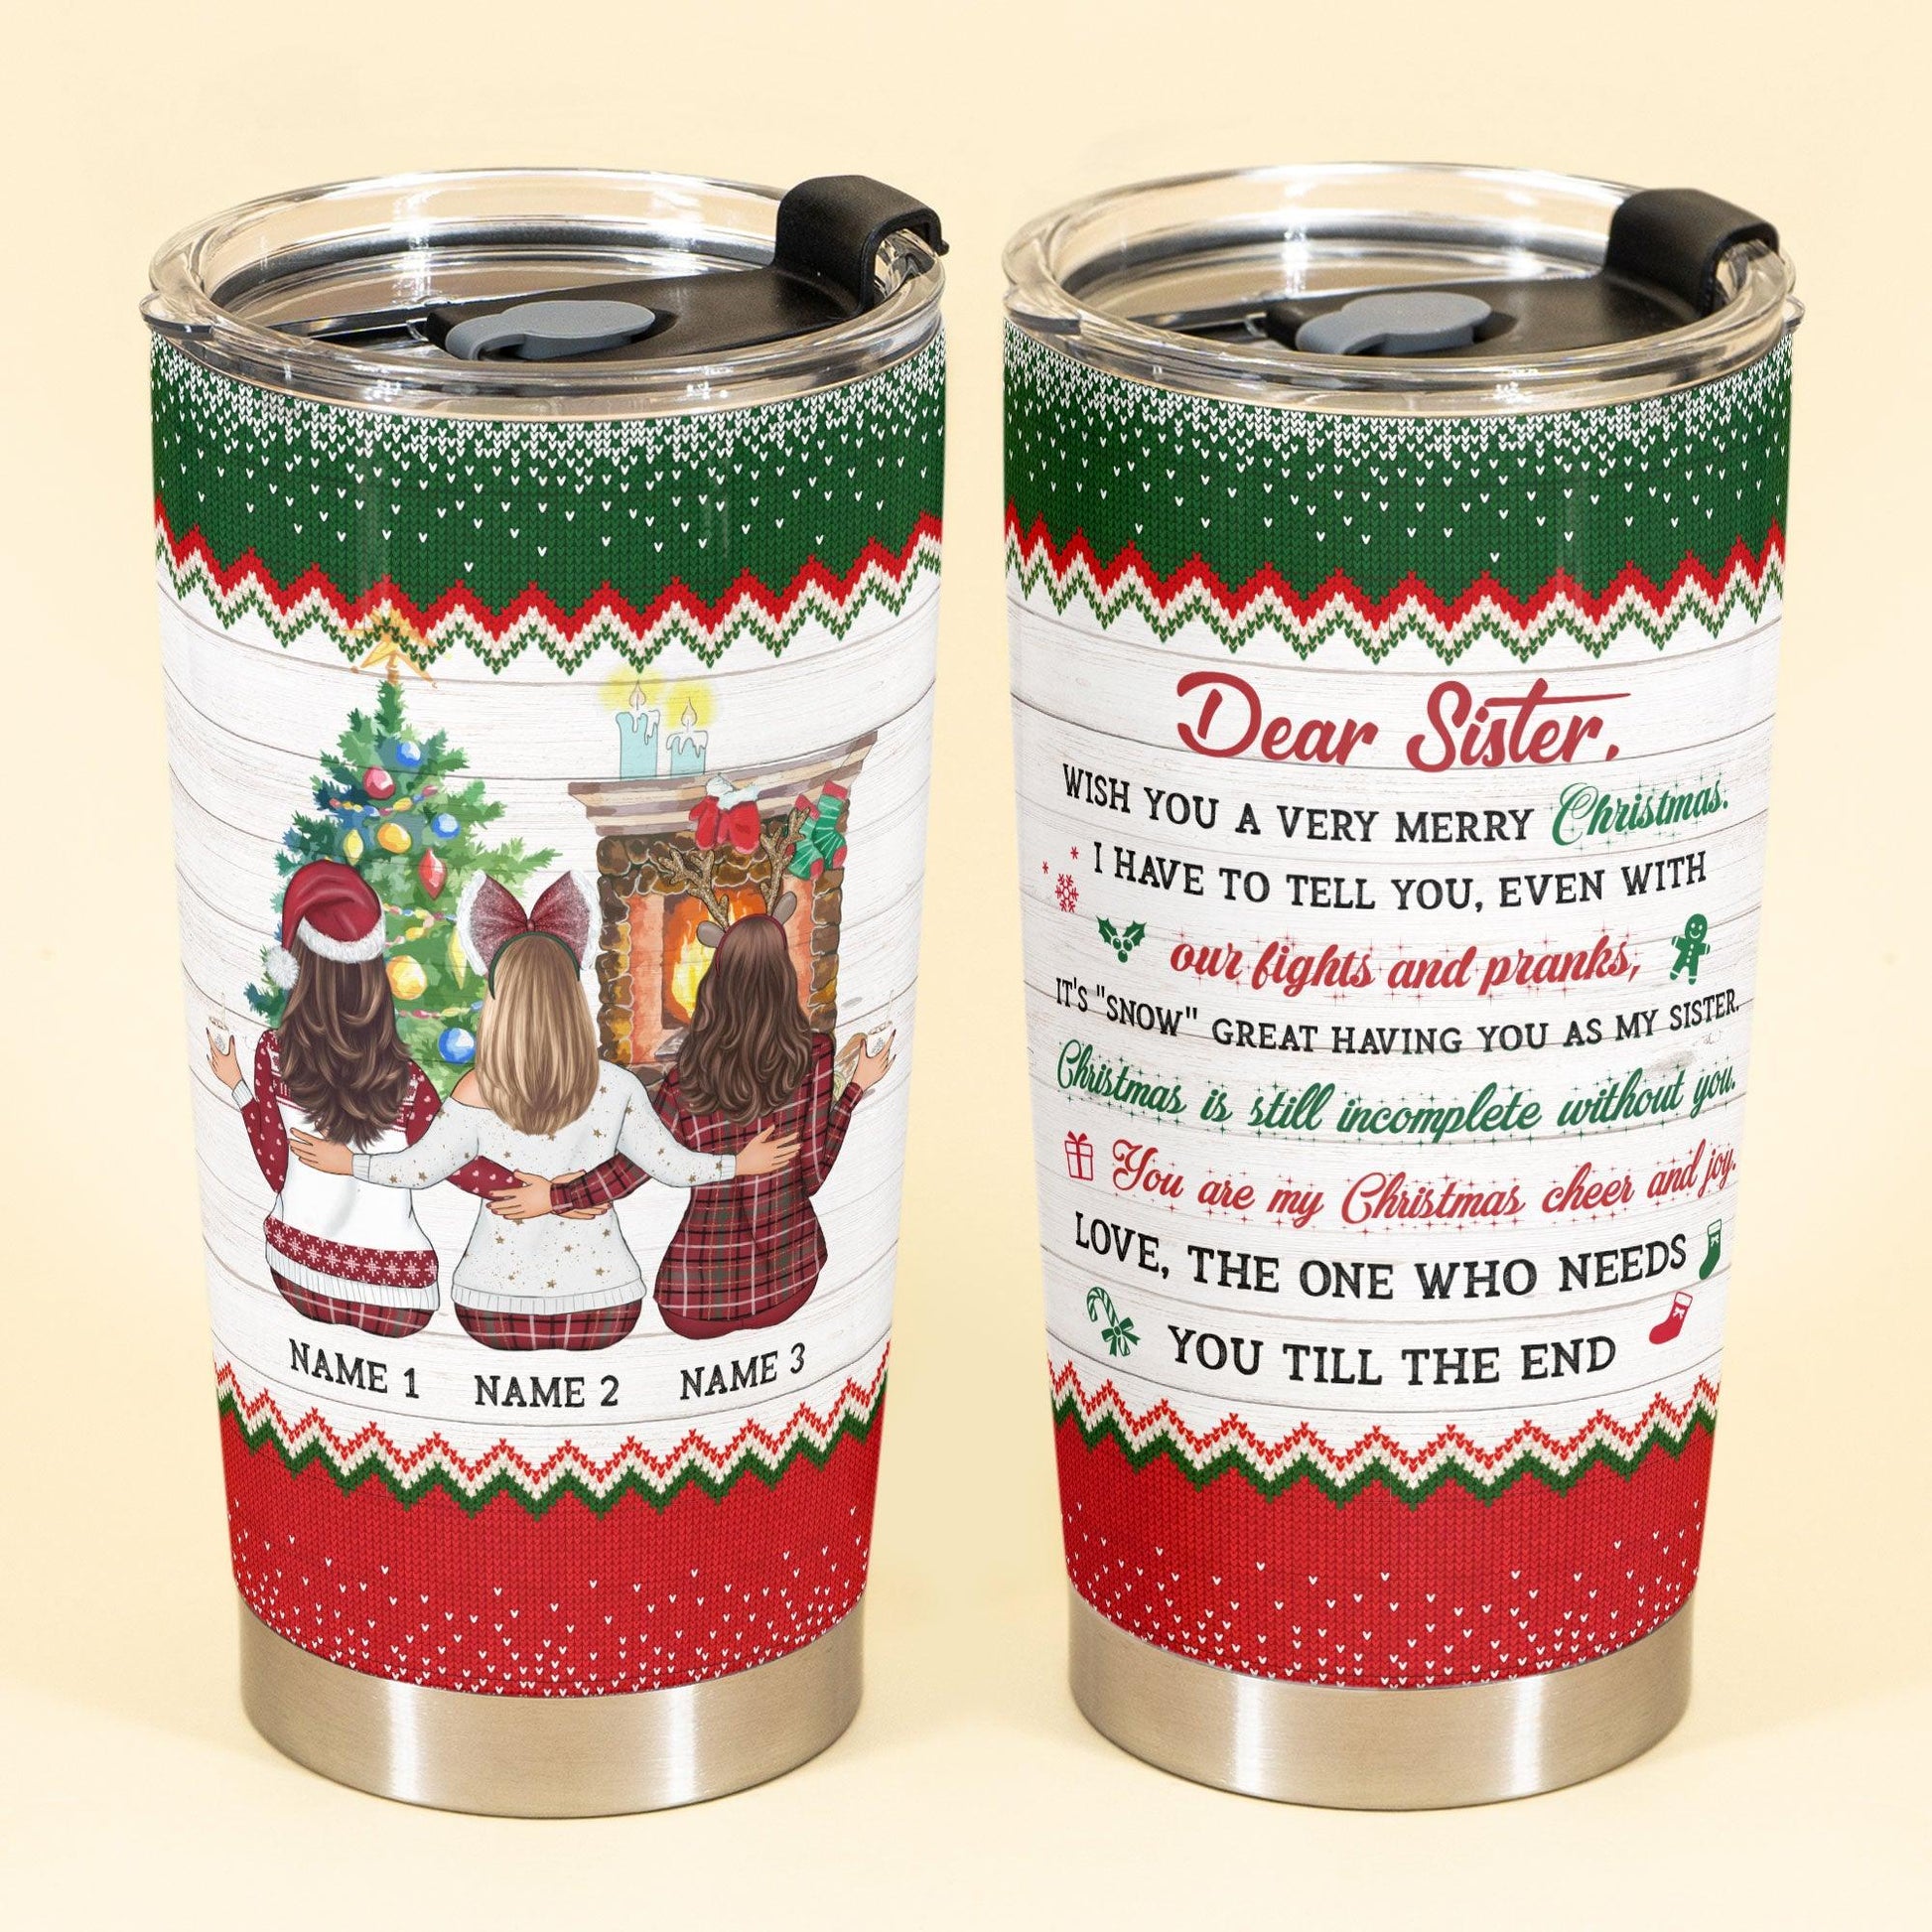 "Snow" Great Having You - Personalized Tumbler Cup - Christmas Gift For Sisters - Macorner